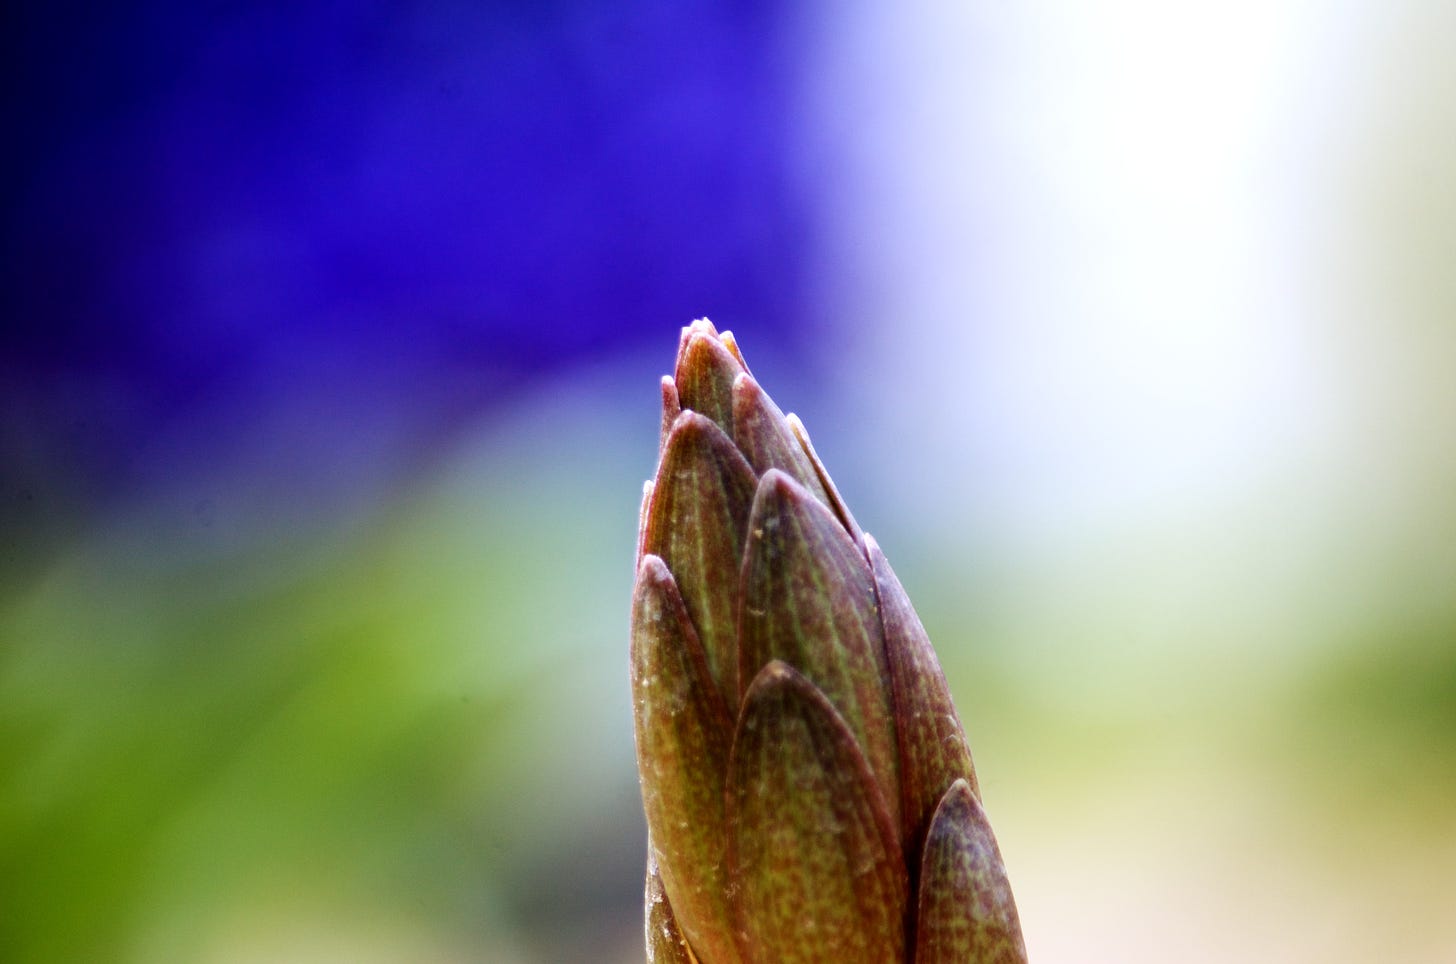 A macro image details a Stargazer Lily bud against a hazy garden background in blue, white, and green.